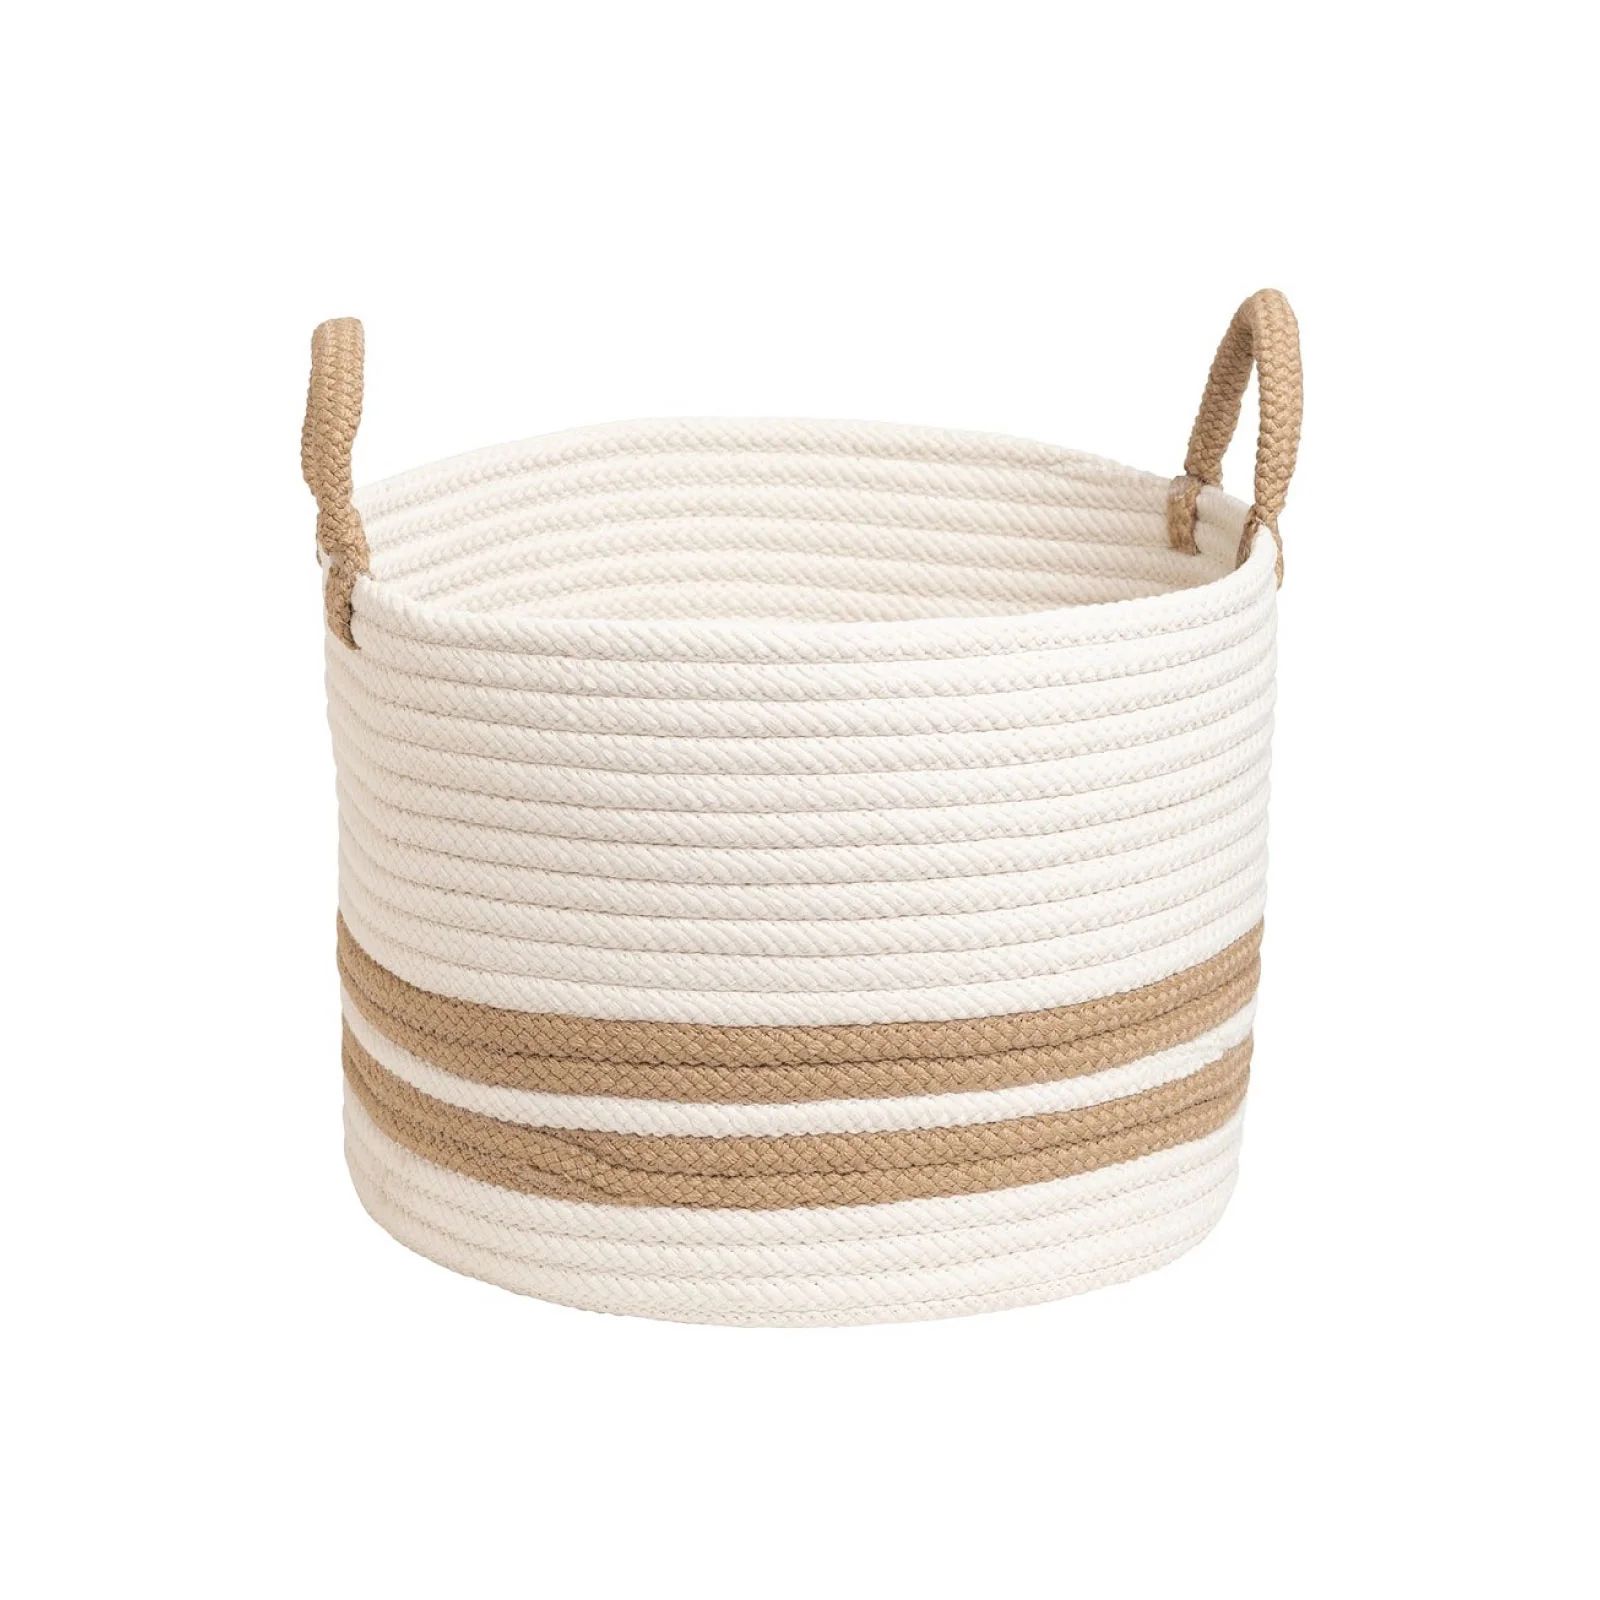 Henry Basket with Tan Stripe | Brooke and Lou